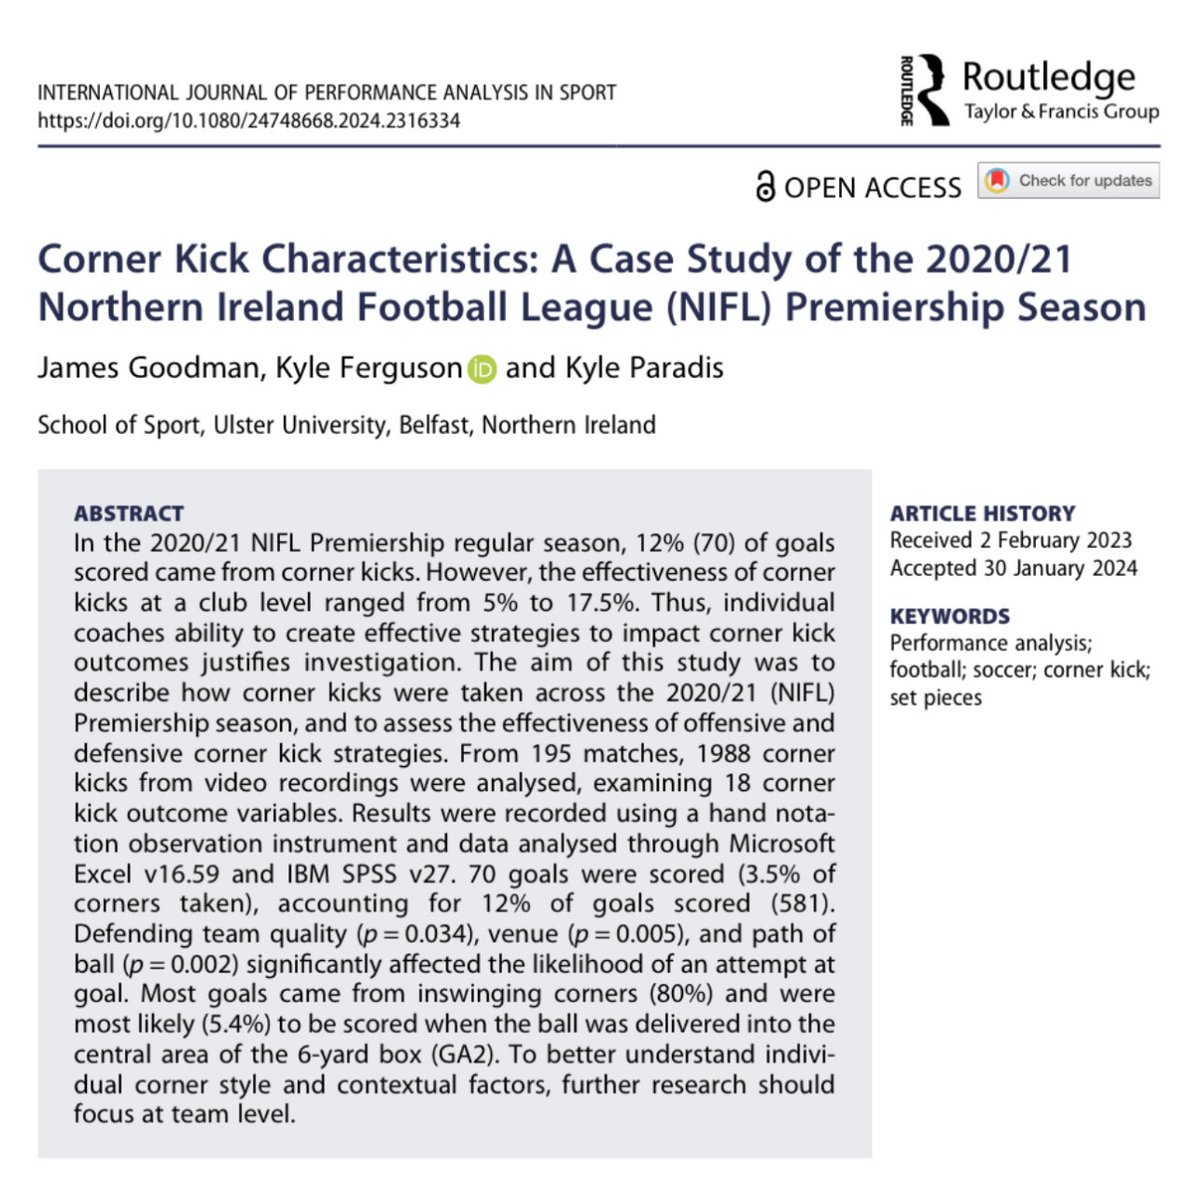 New article around the effectiveness of set piece strategies, more goals are scored from in-swinging corners @UlsterSchSport @KyleAFerguson Corner Kick Characteristics: A Case Study of the 2020/21 Northern Ireland Football League (NIFL) Premiership Season tandfonline.com/doi/full/10.10…